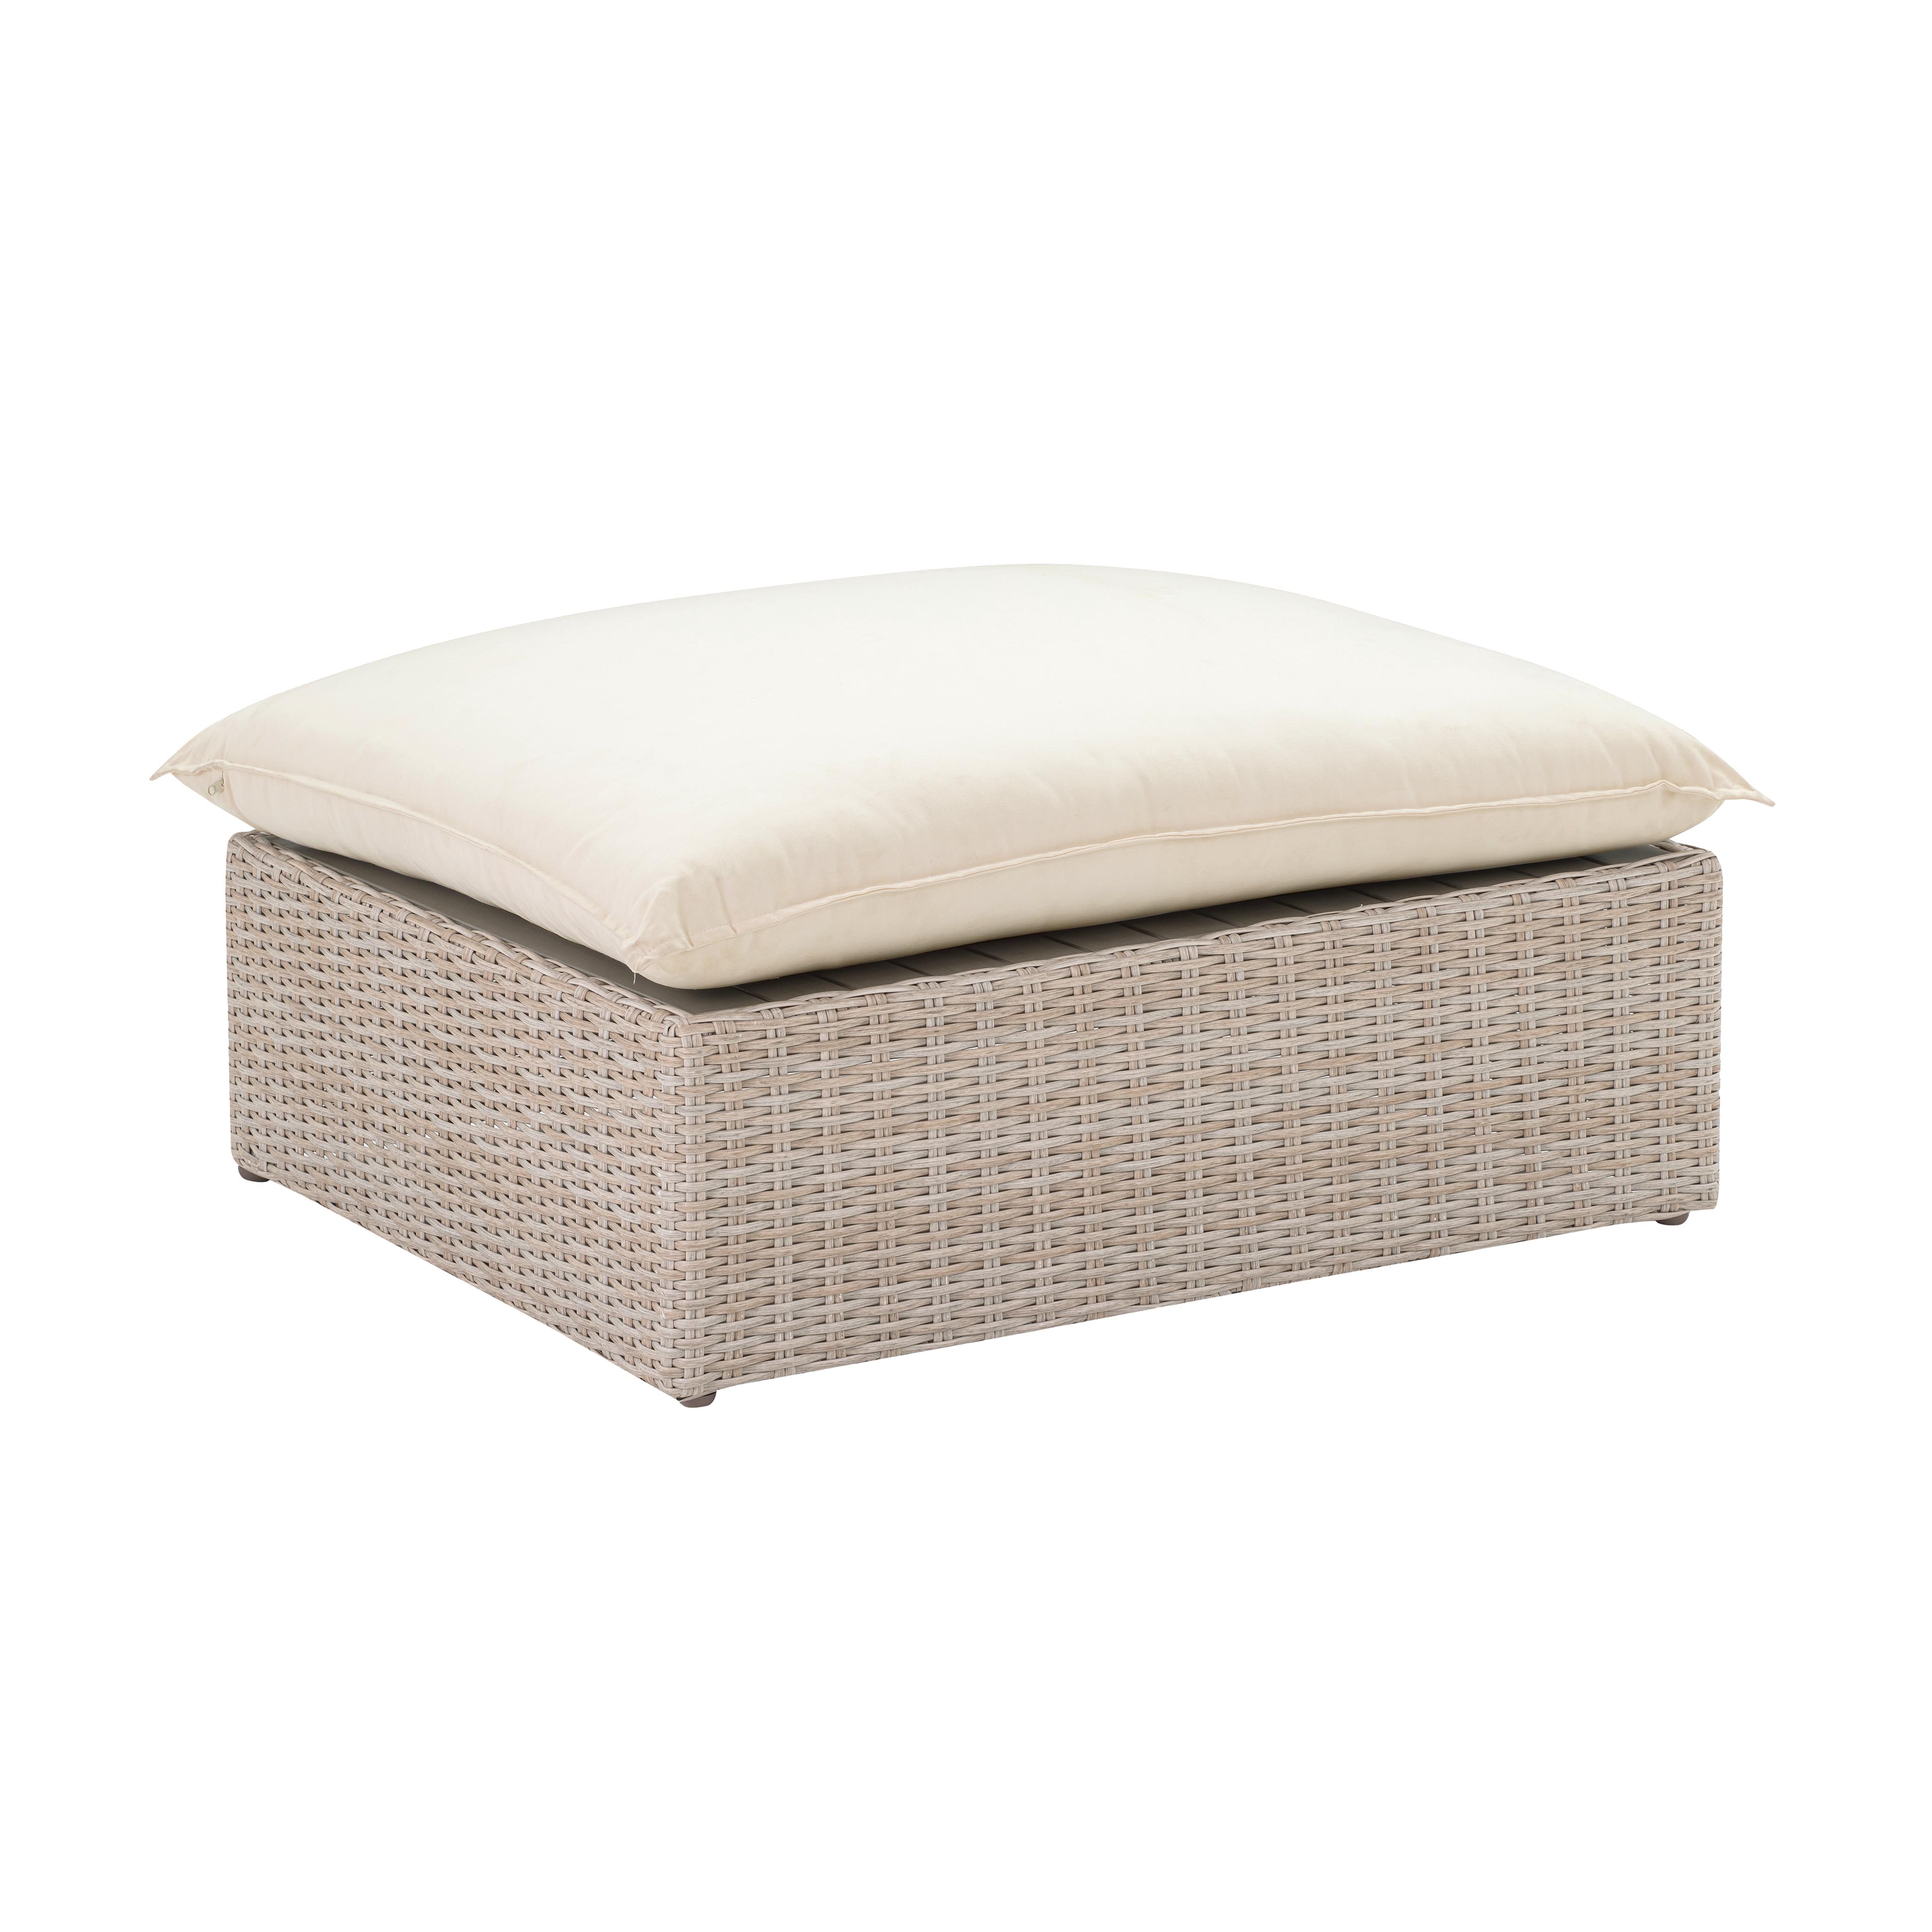 Cali Natural Wicker Outdoor Ottoman - Image 0